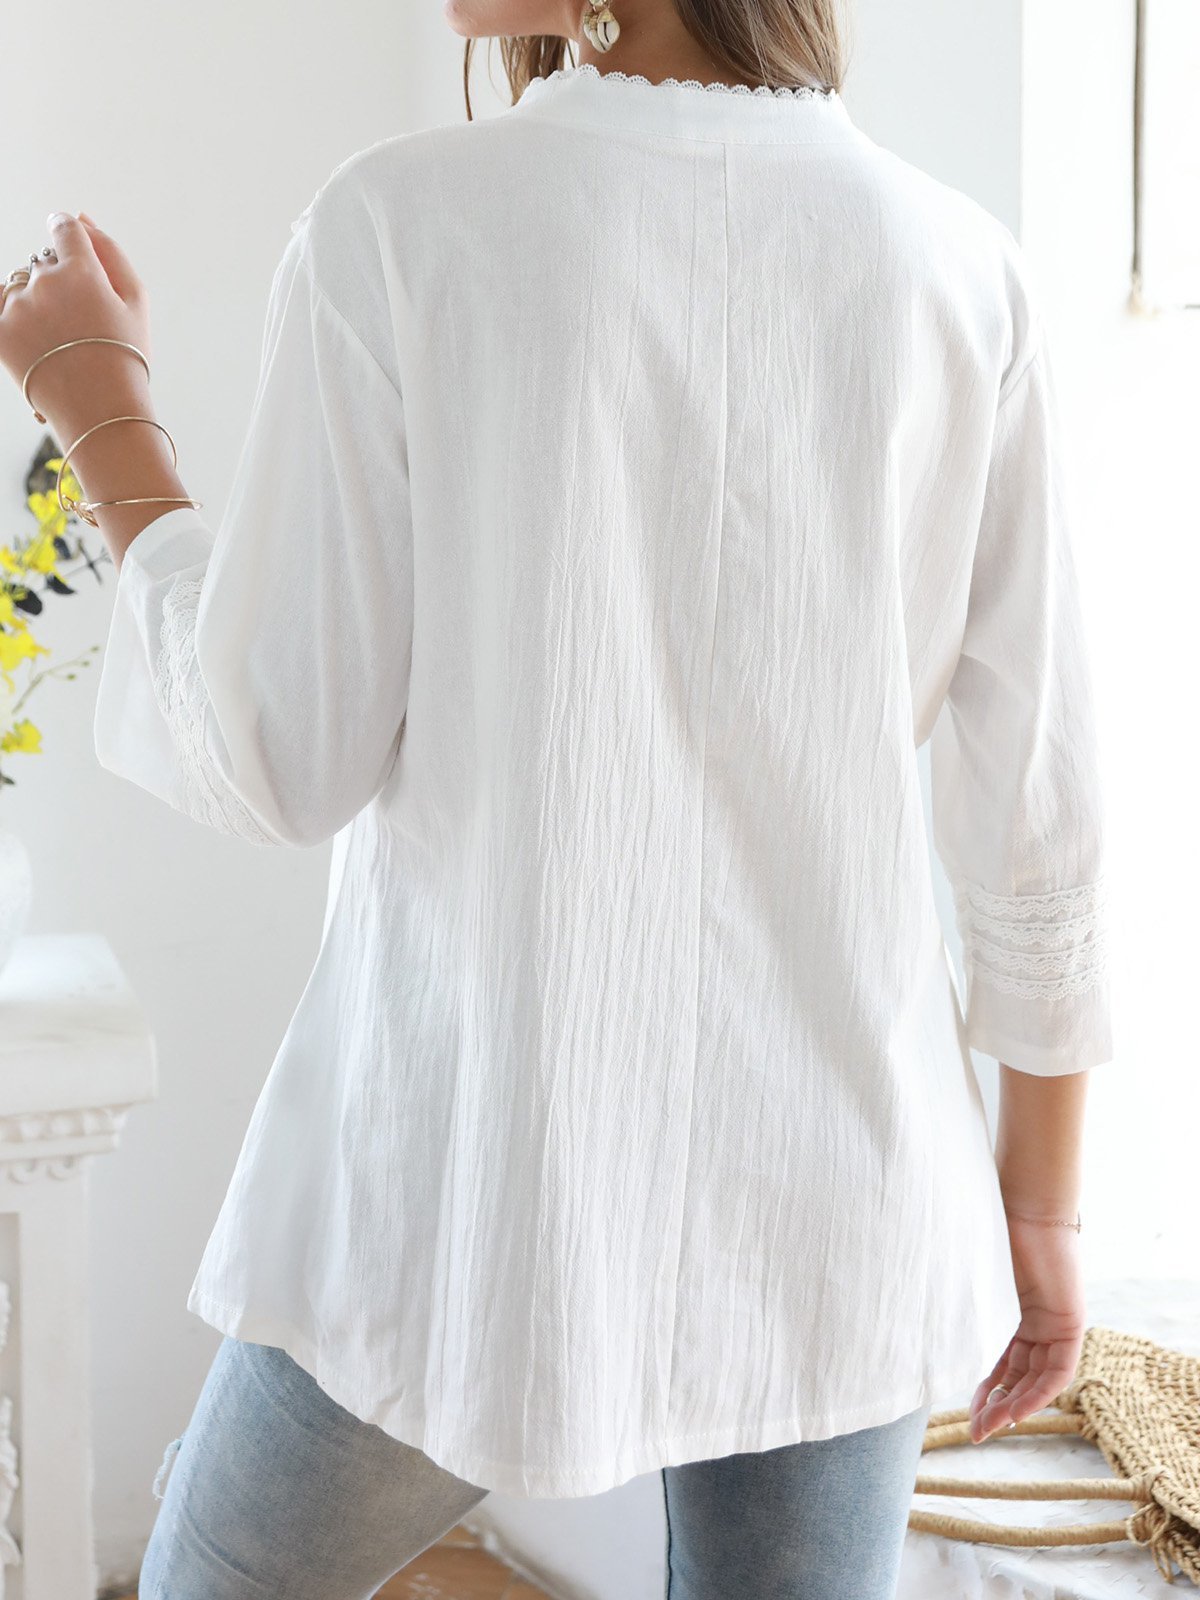 Notched Cotton Vacation Blouses